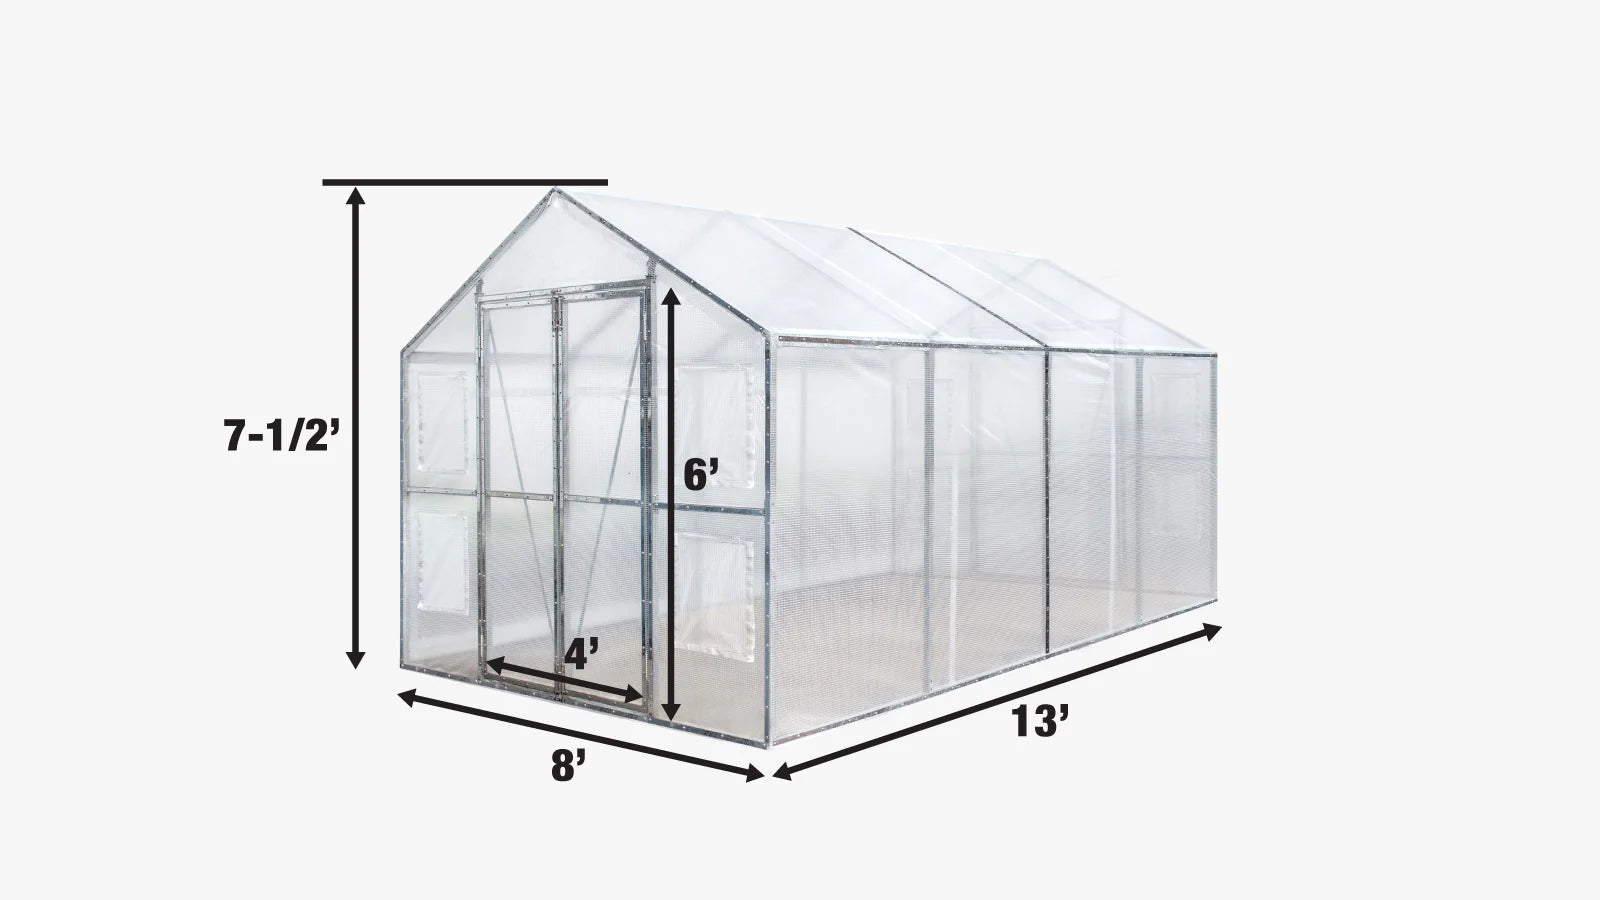 TMG Industrial 8’ x 13’ Greenhouse Grow Tent w/20 Mil Ripstop Leno Mesh PVC Cover, Galvanized Steel Frame, Roll-up Windows, TMG-GH813-specifications-image